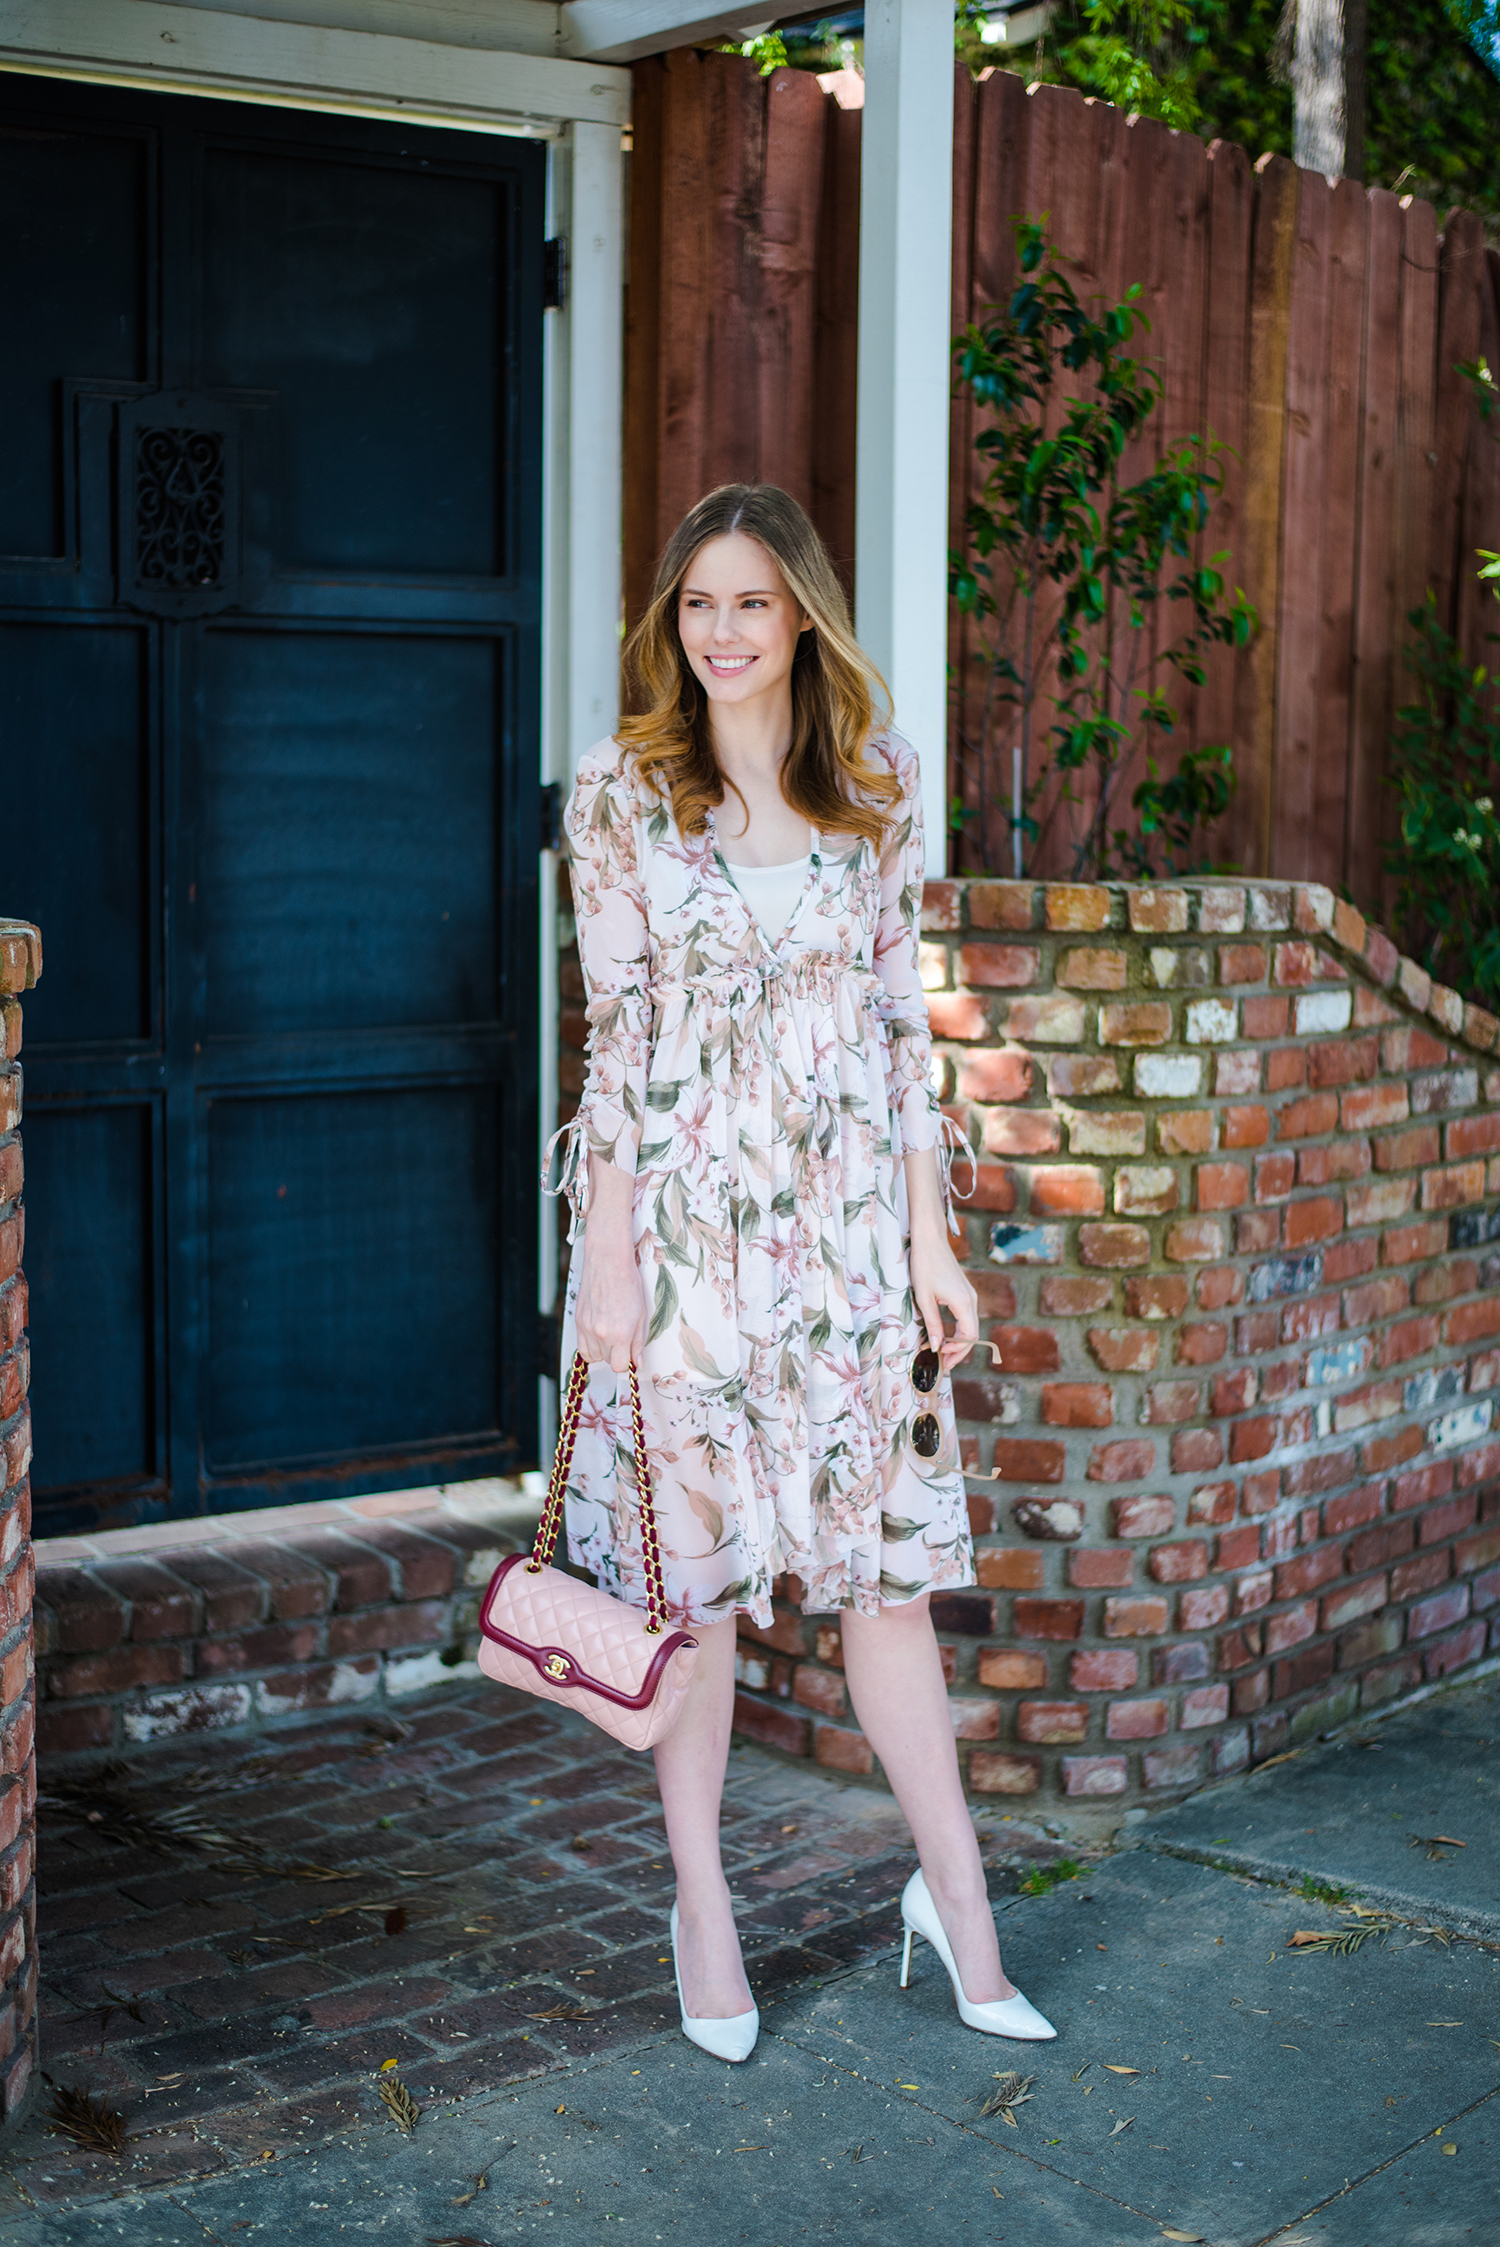 Miss USA 2011 Alyssa Campanella of The A List blog turns 27 in Topshop Floral Lily Mesh dress